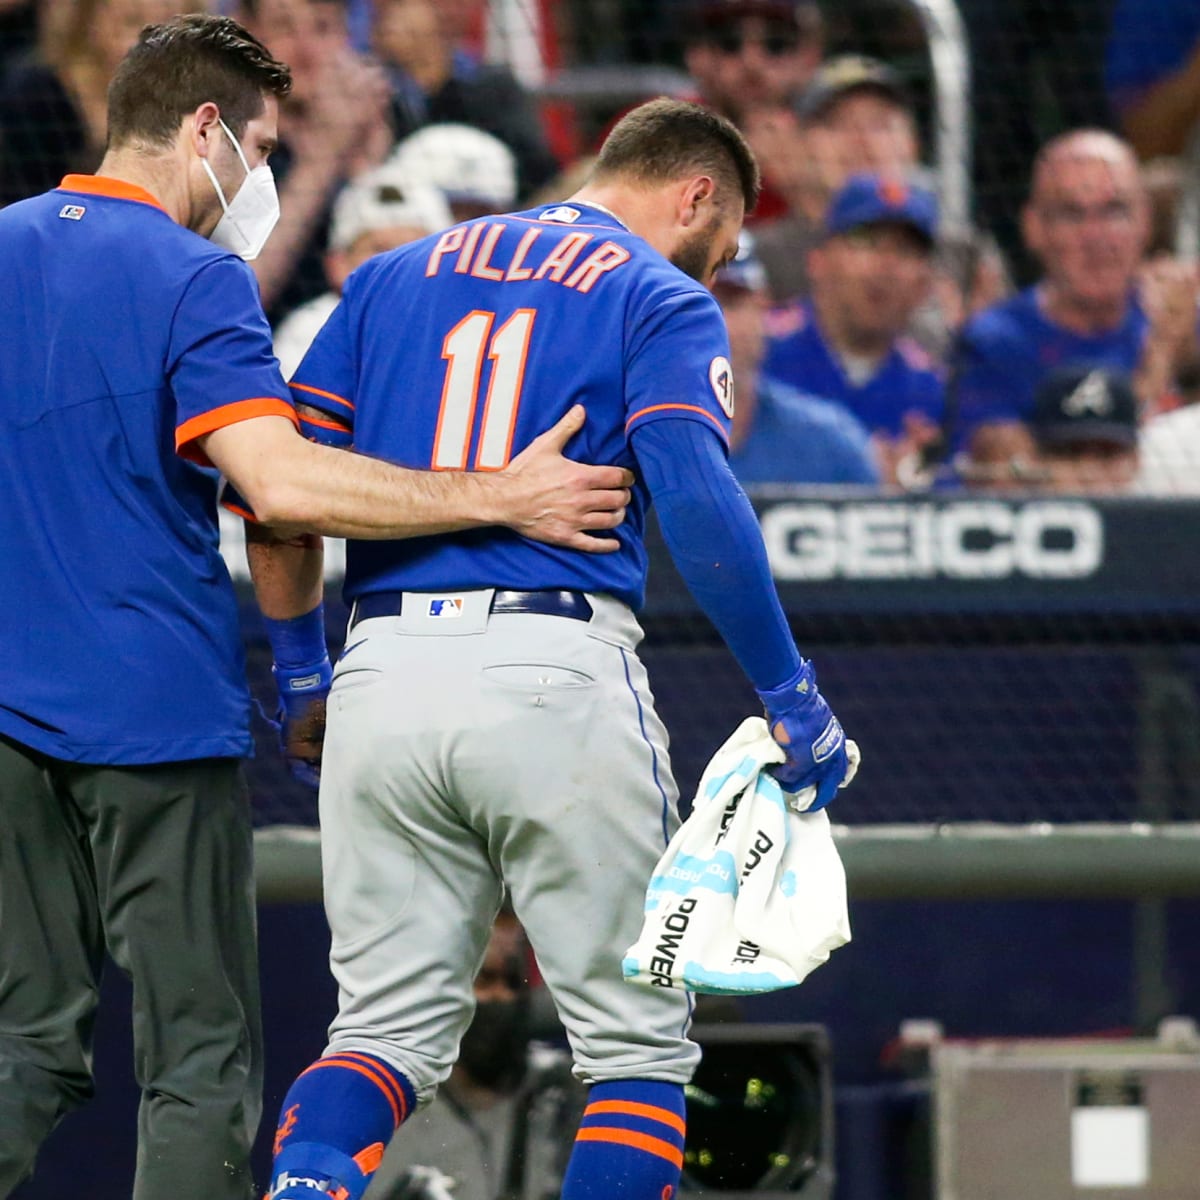 Kevin Pillar hit in face injury: MLB must address HBPs - Sports